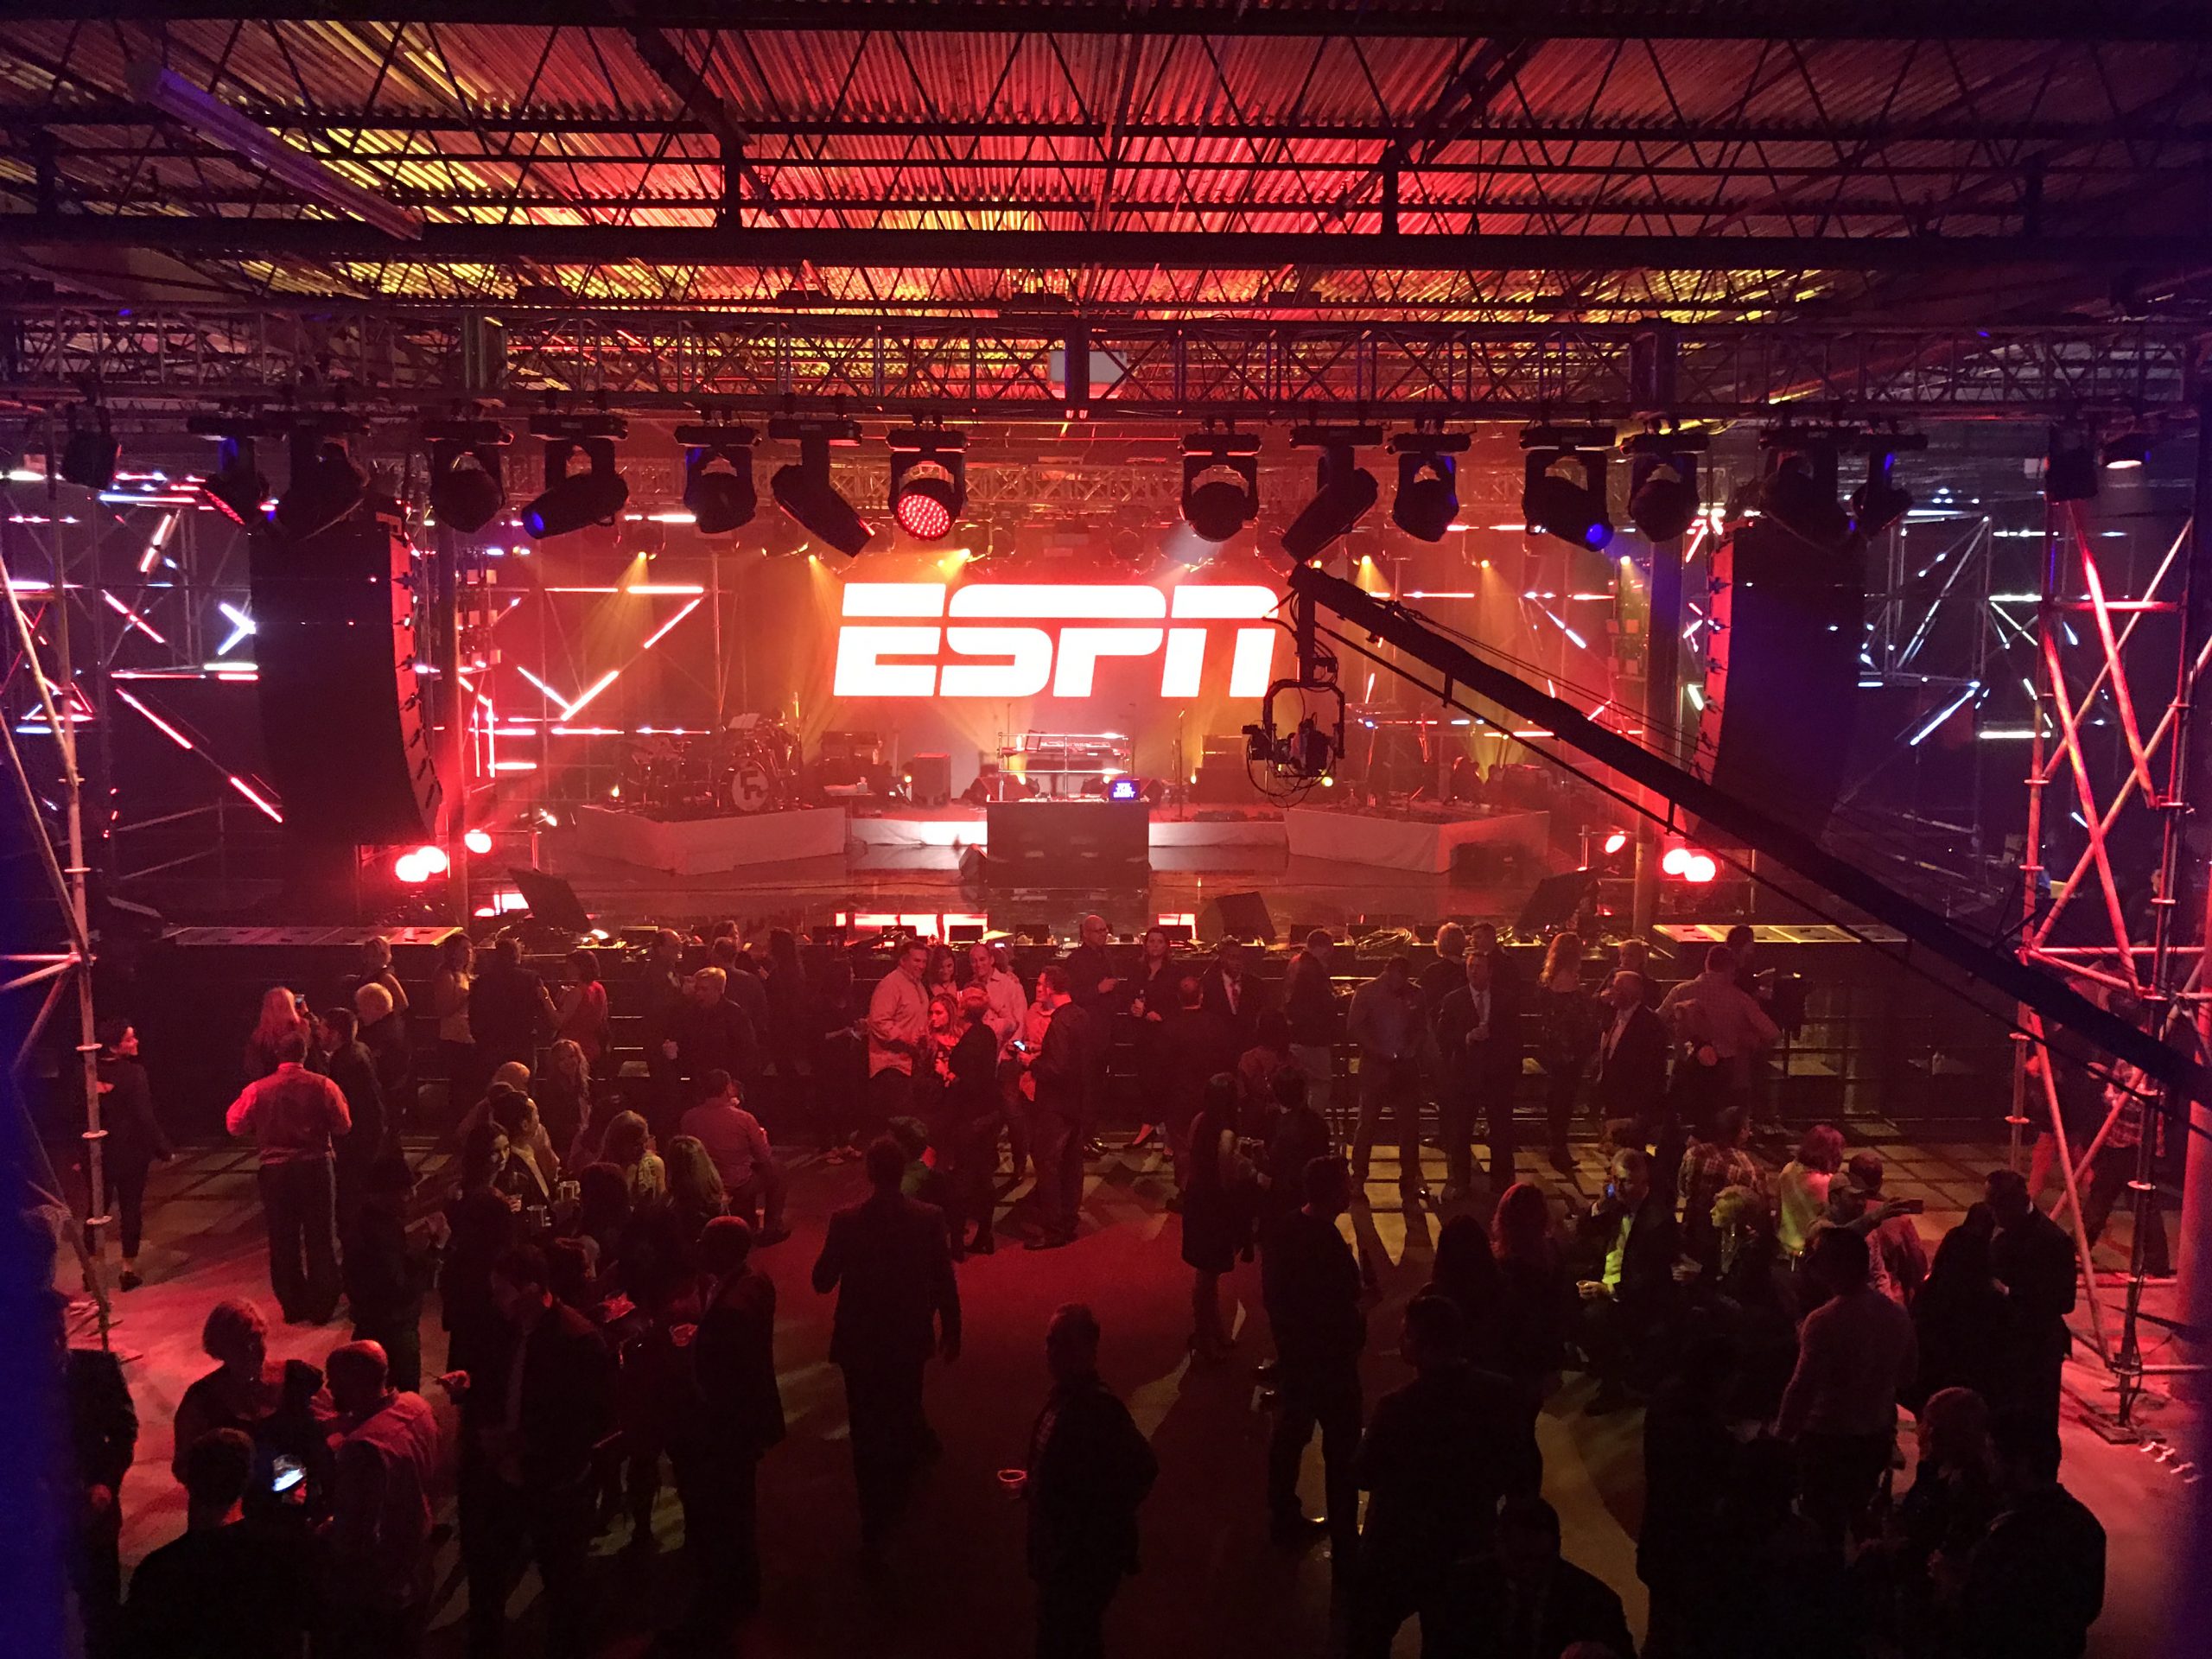 Stage showing ESPN on screen